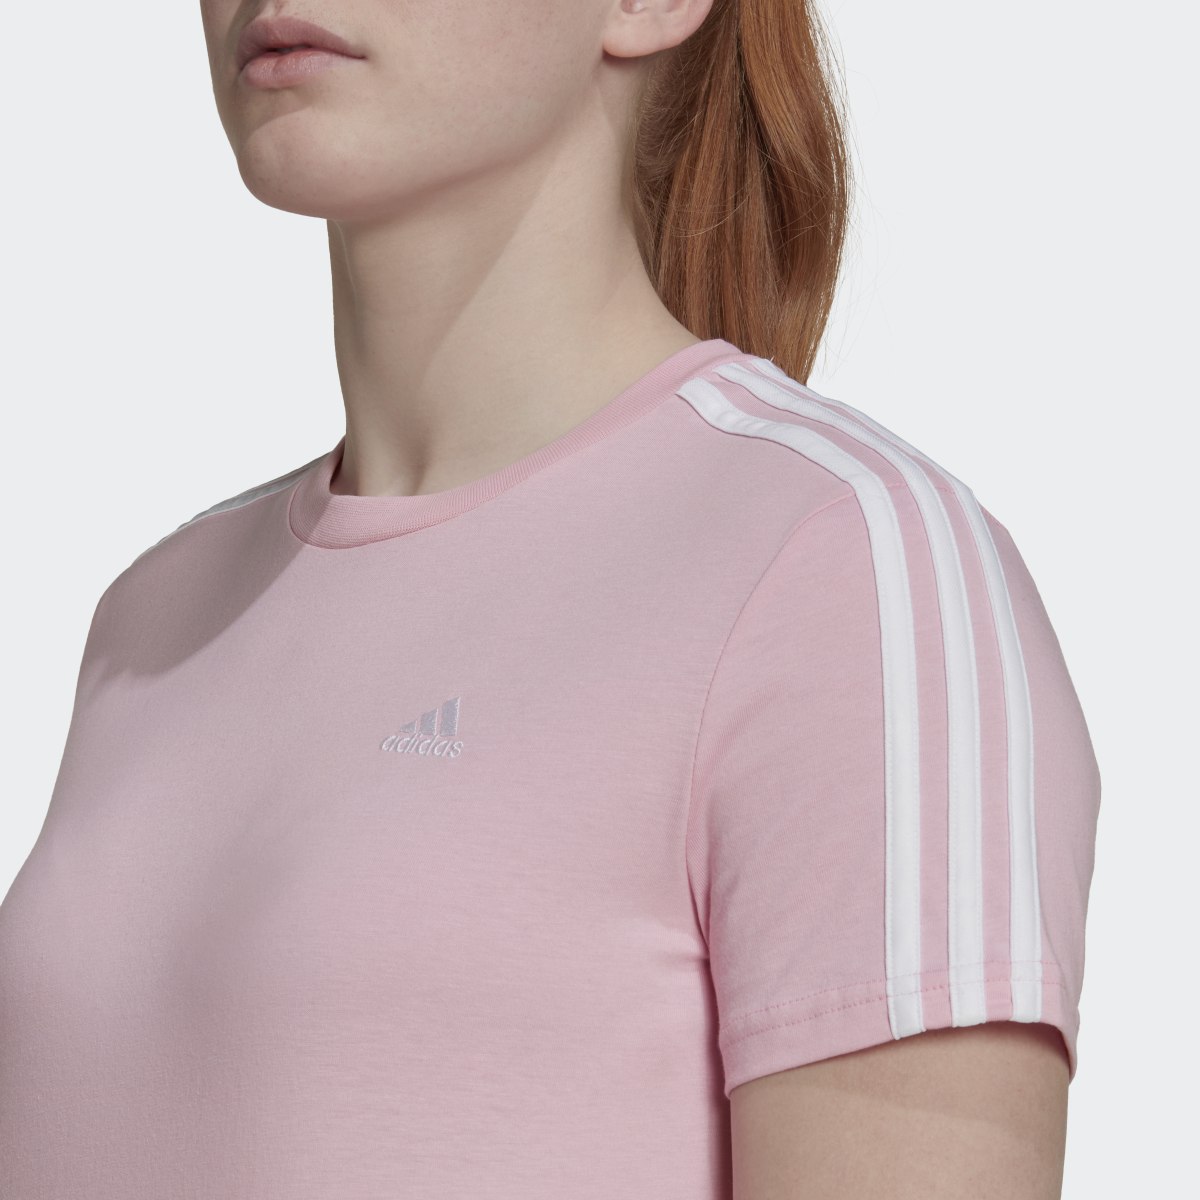 Adidas Essentials Loose 3-Stripes Cropped Tee. 6